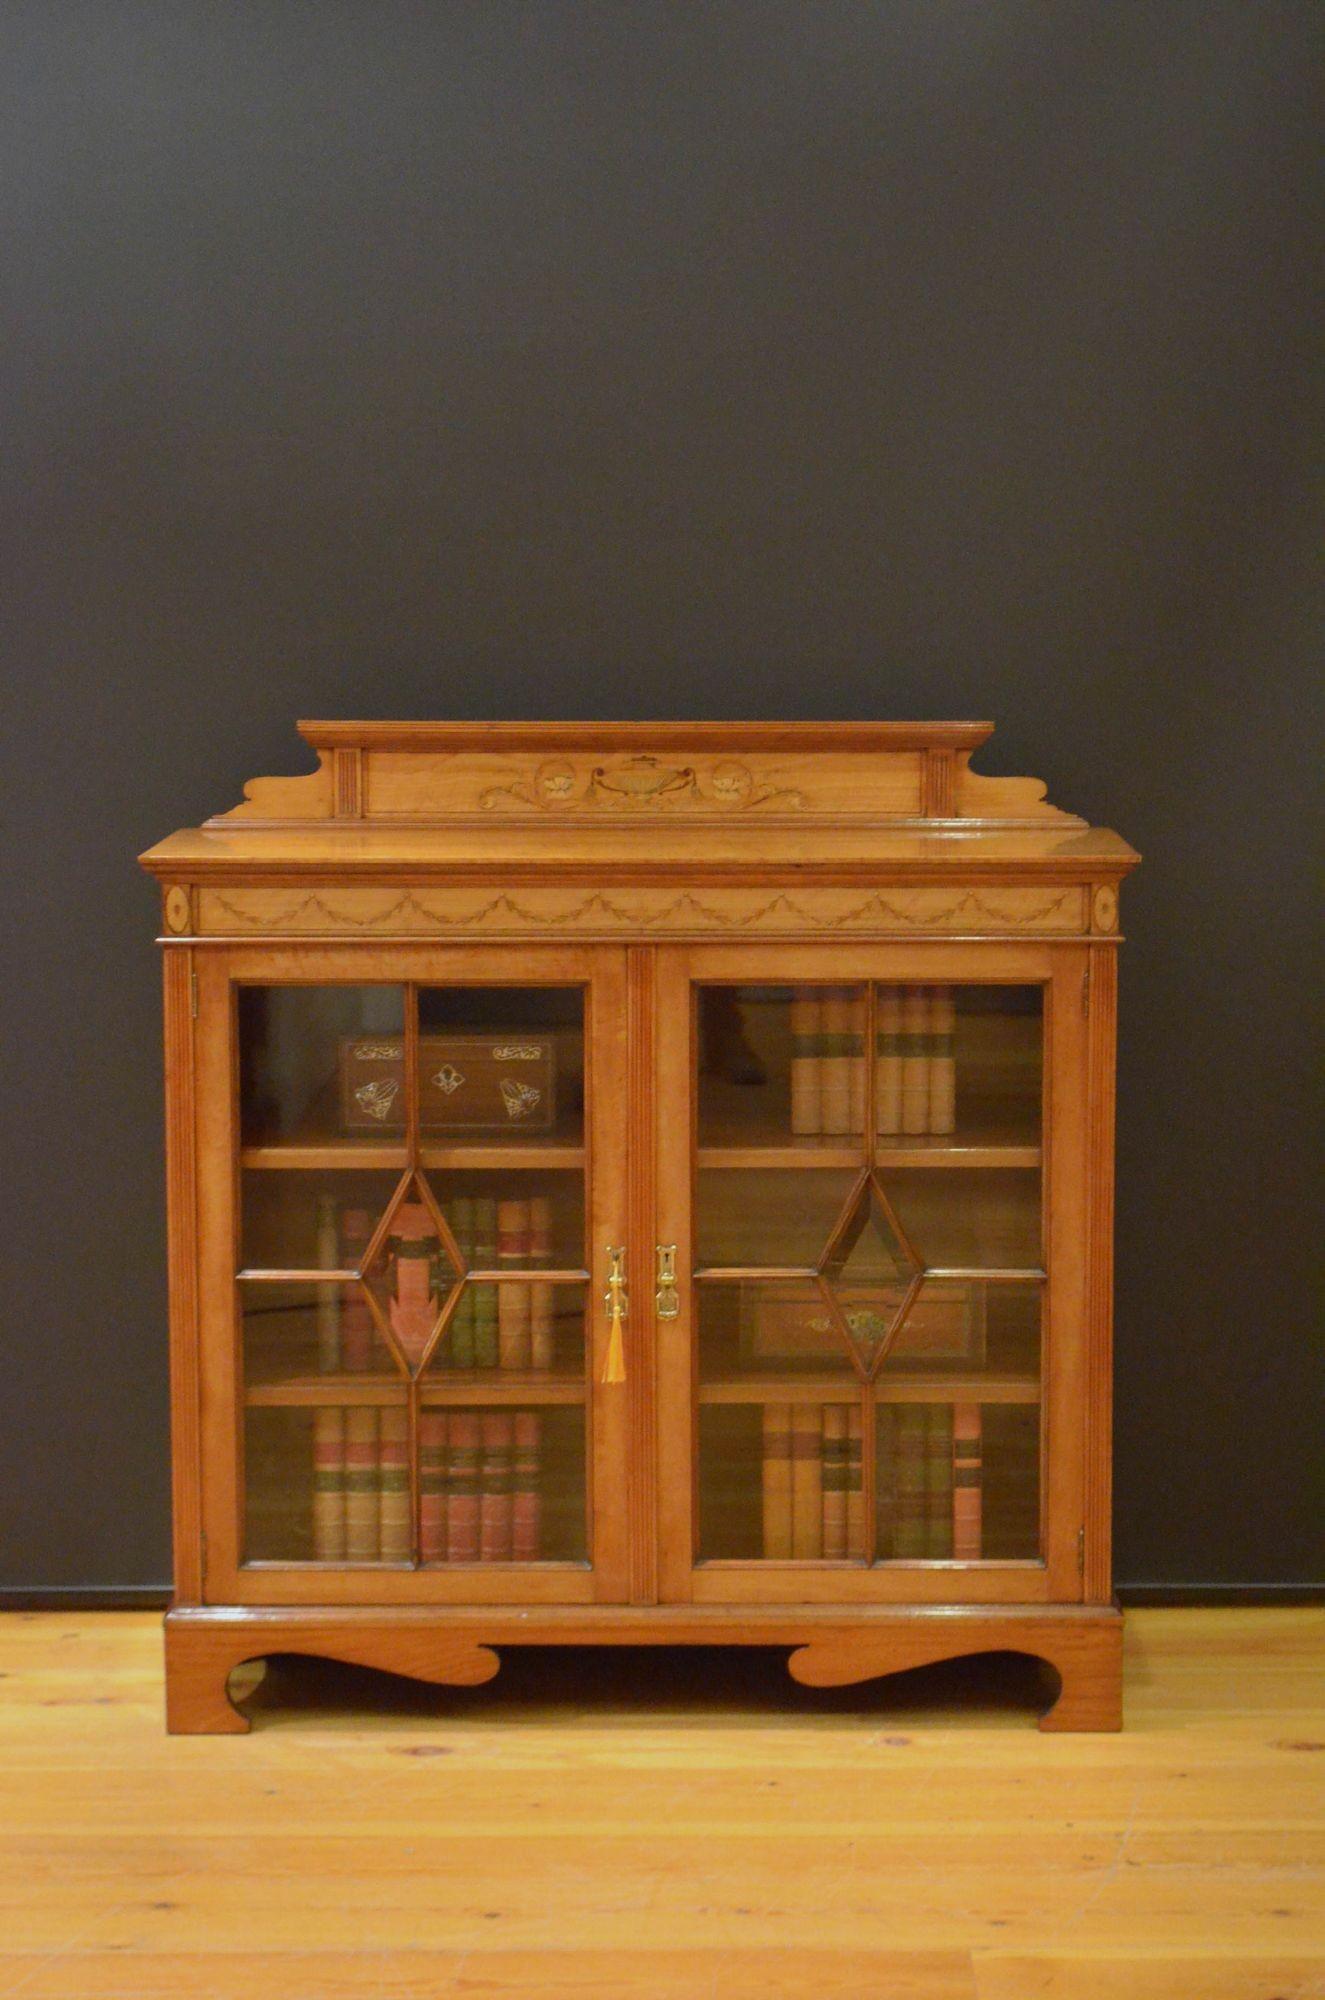 Sn5499 Fine quality and very attractive late Victorian / Edwardian satinwood bookcase or display cabinet, having shaped, inlaid and reeded upstand, well figured top and frieze inlaid with Neoclassical motifs above a pair of astragal glazed door